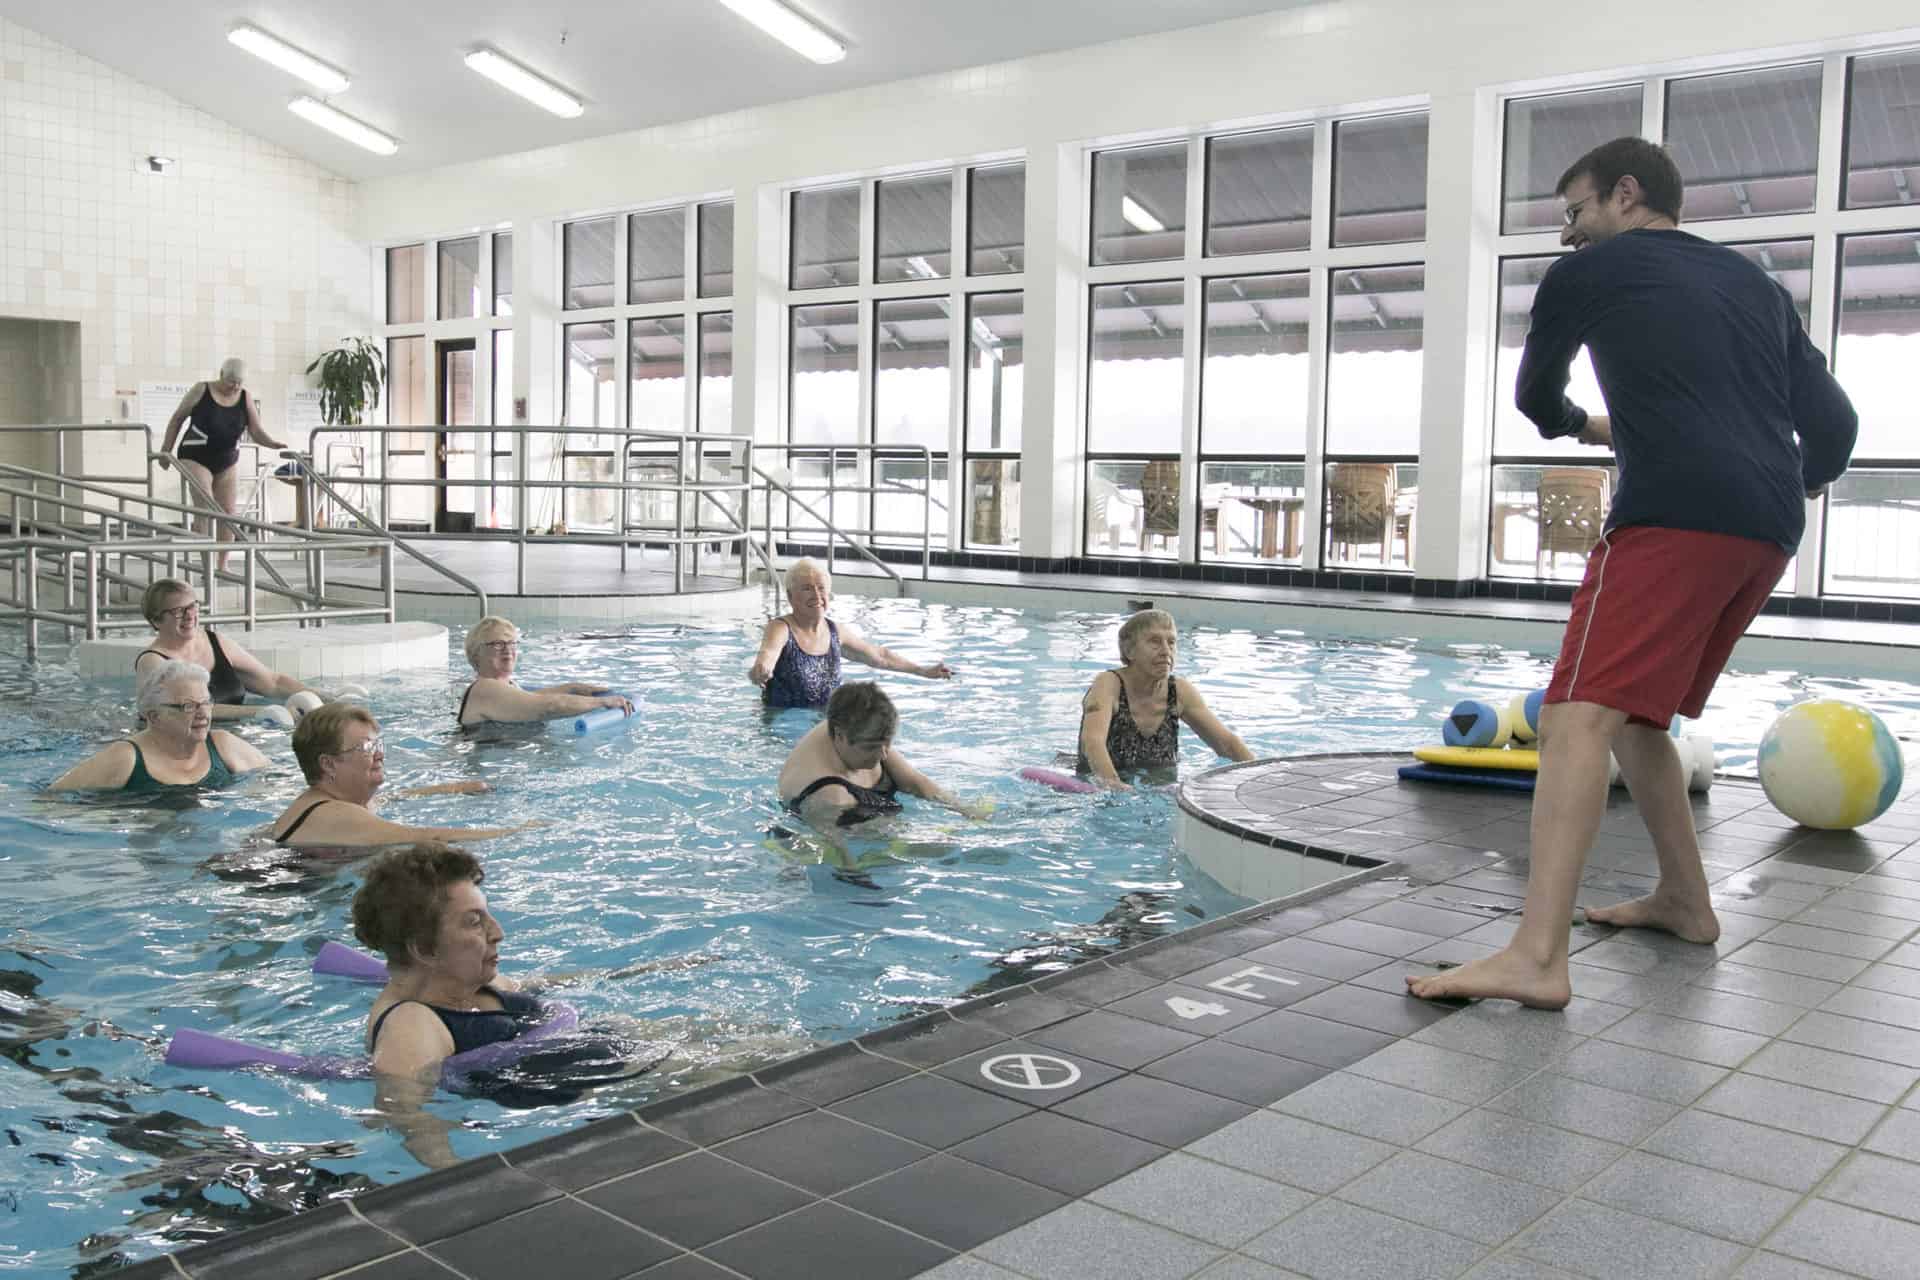 Copeland Oaks residents in a swimming pool doing water aerobics with an instructor.